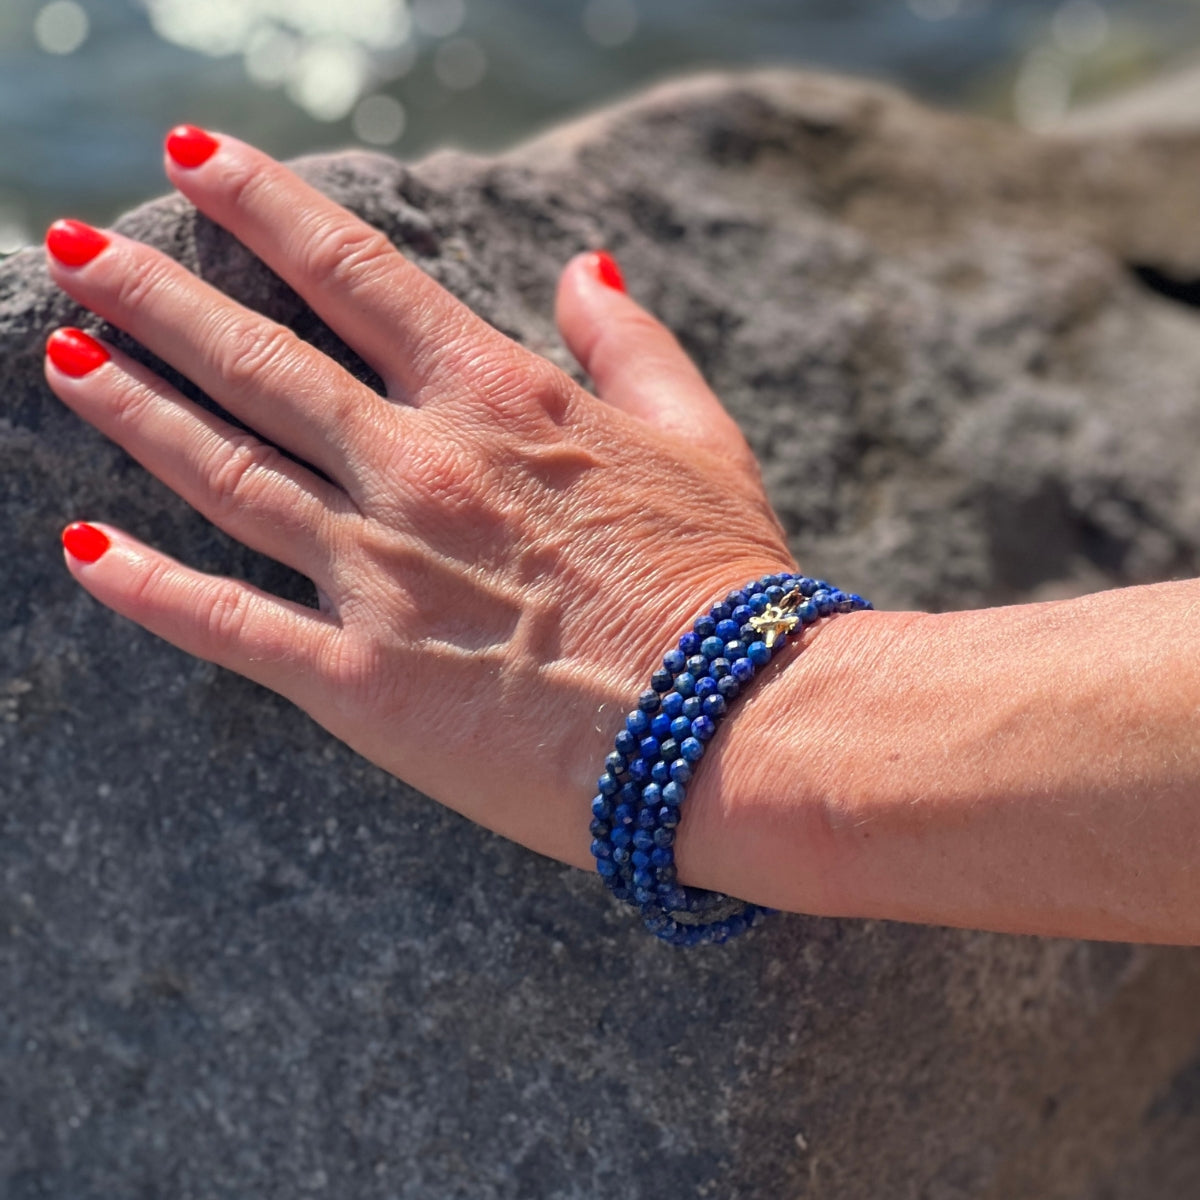 The Ocean Treasures Wrap Bracelet features stunning blue Lapis Lazuli stones that evoke the calming and peaceful essence of the ocean. Adding to the charm of the bracelet is the tiny silver dipped Shark Tooth charm. The Shark Tooth is a symbol of strength and resilience. Perfect for the Adrenaline Hunters and Shark Lovers